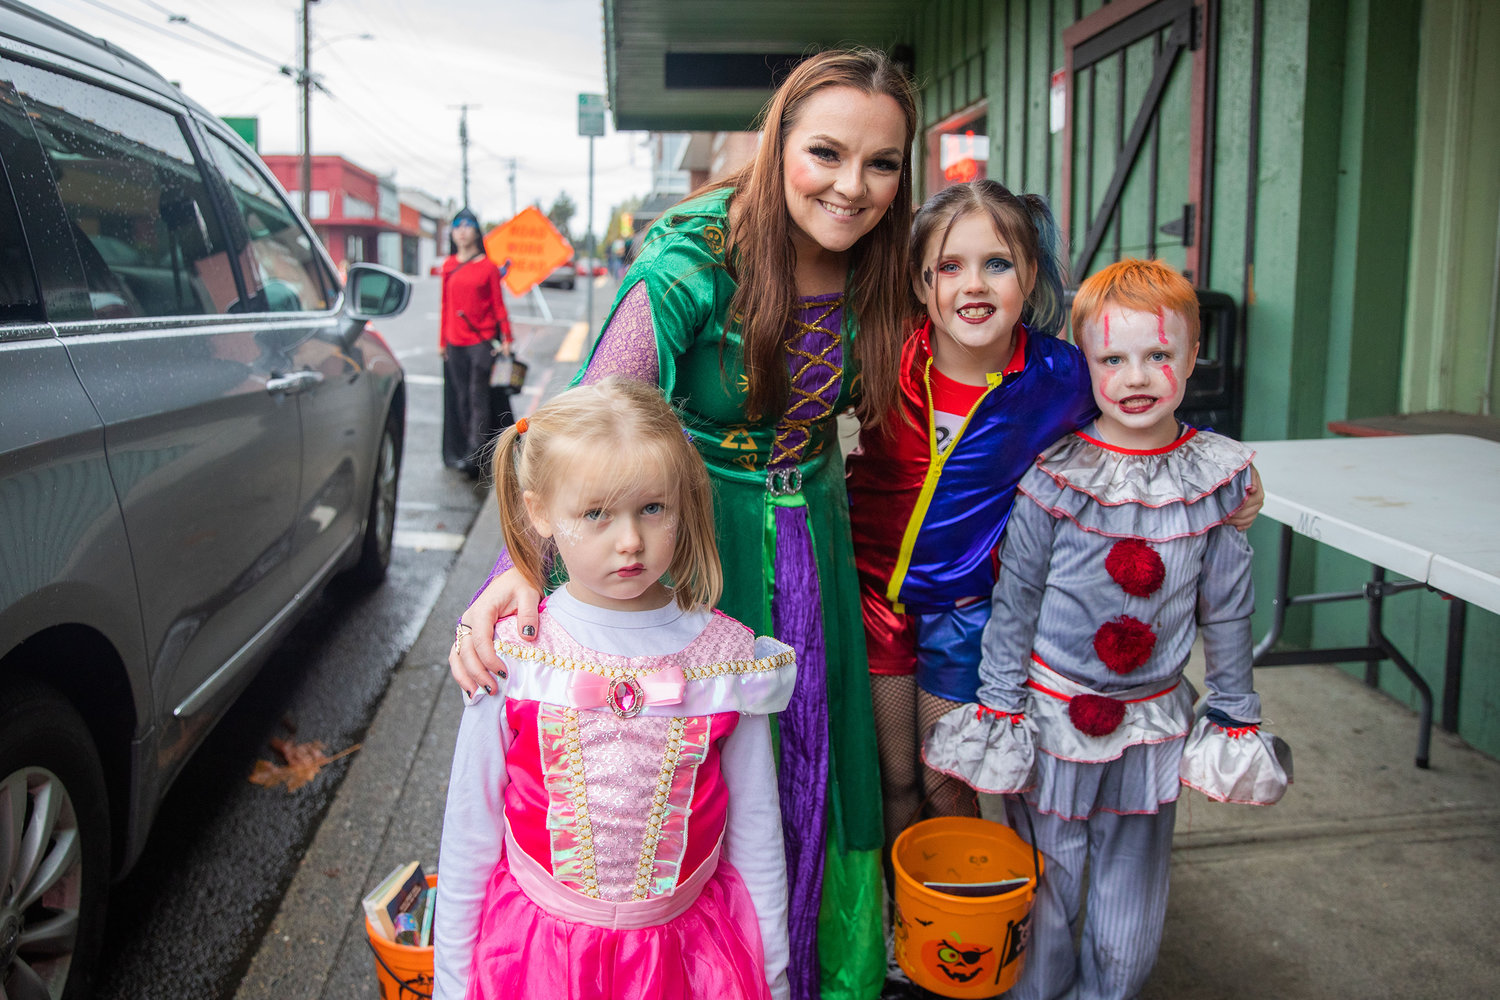 Spencer Hoven, center left, poses for a photo with Lynnley, Garrett and Kaidyn while trick-or-treating in downtown Winlock on Halloween.